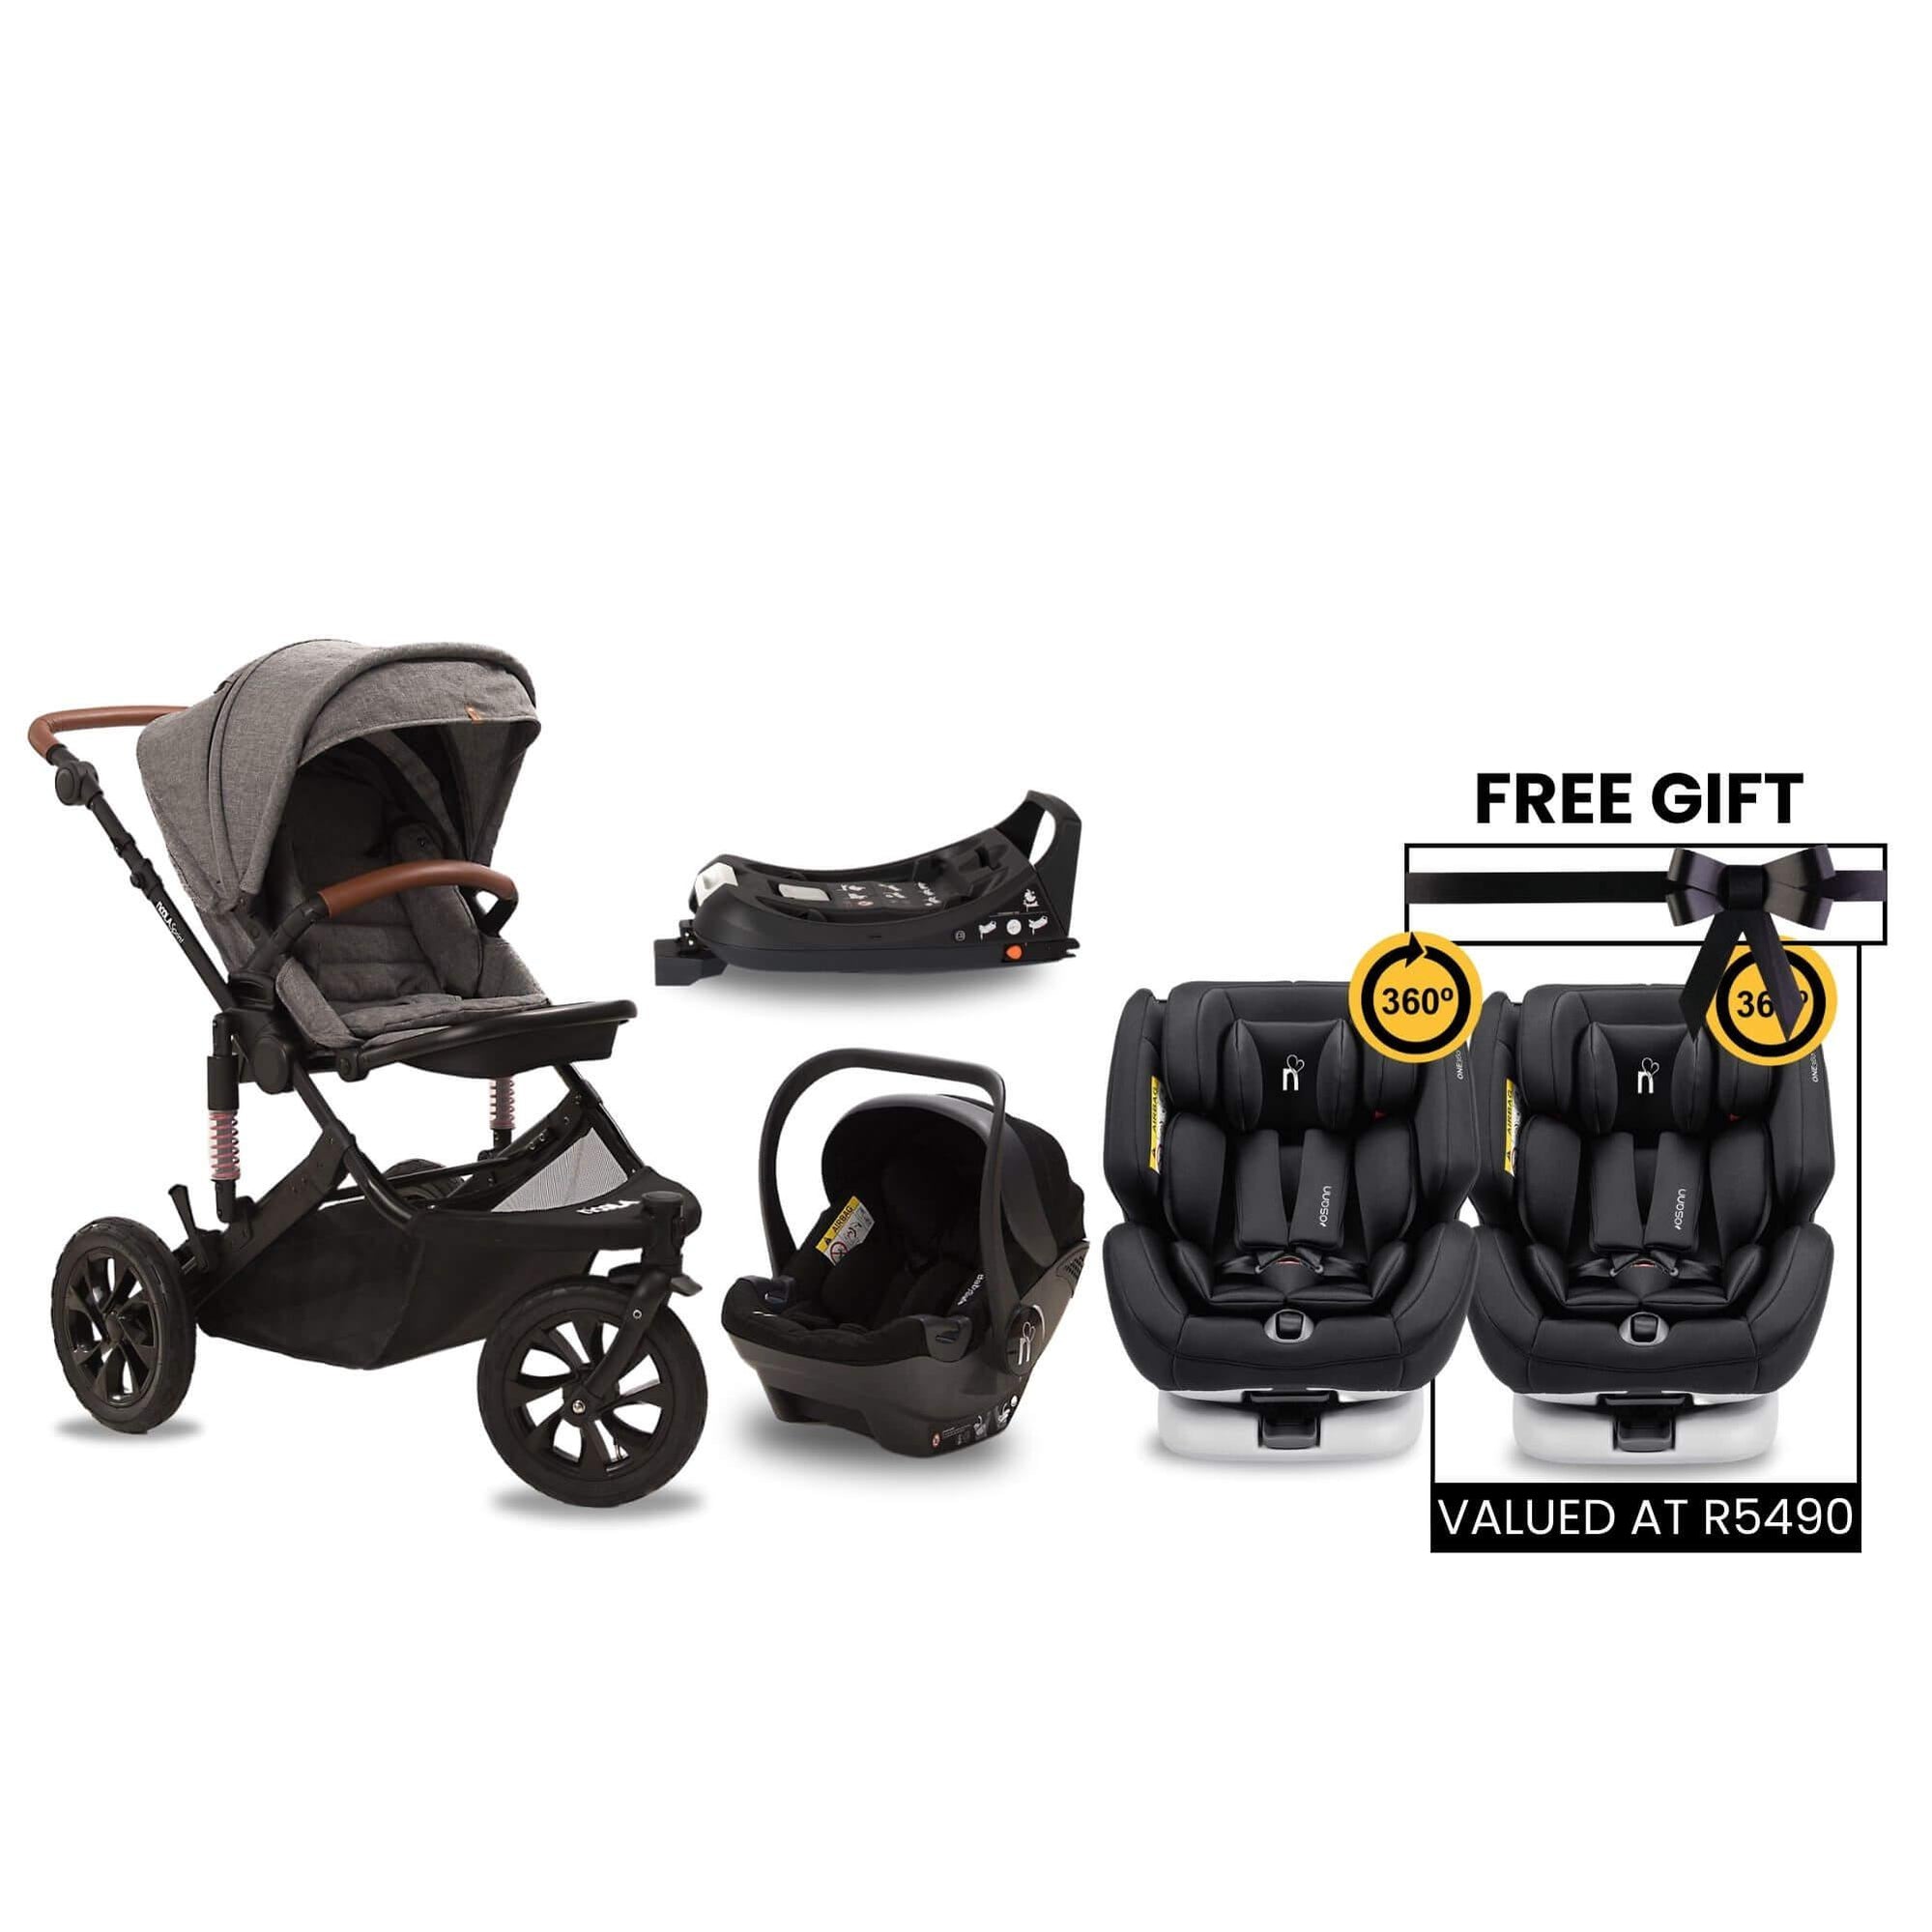 noola sprint 5in1 lunar grey travel system baby stroller #SELECT THE COLOUR OF YOUR ONE360_ONE360 | MIDNIGHT BLACK